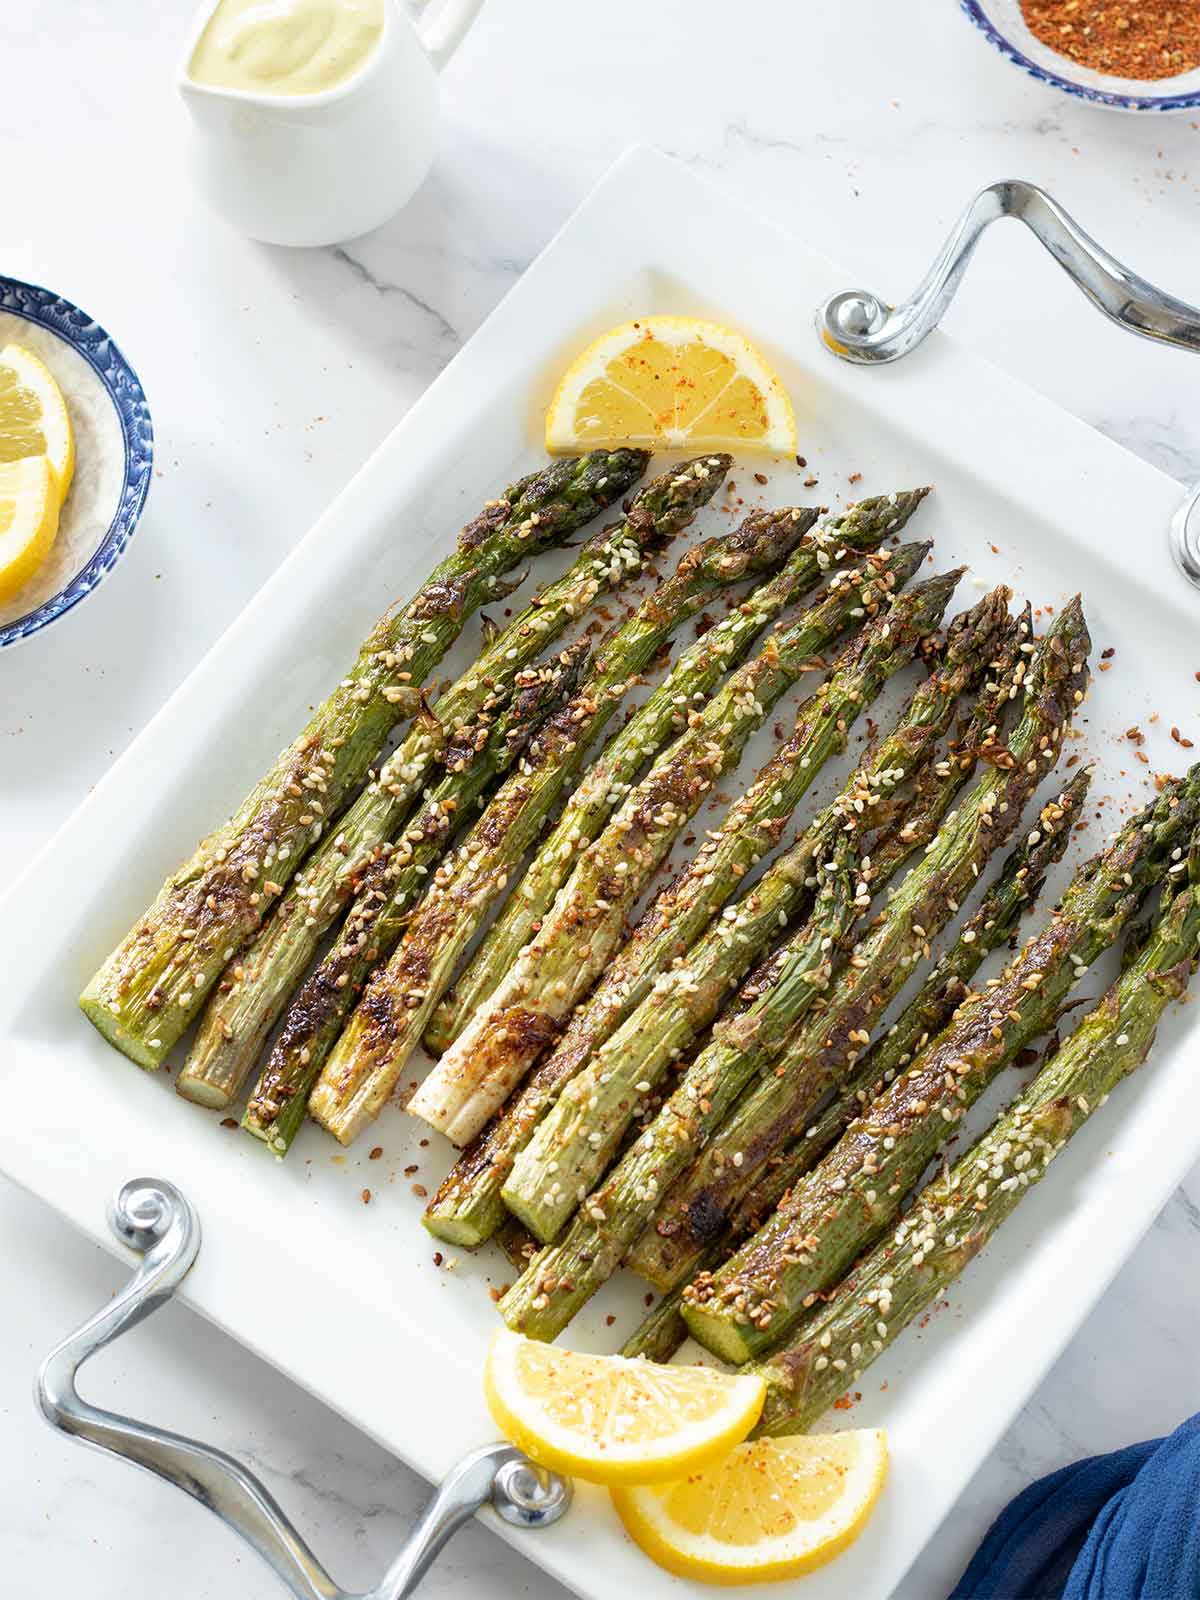 Asparagus side dish sprinkled with sesame seeds and red pepper flakes and drizzled with freshly squeezed lemon juice